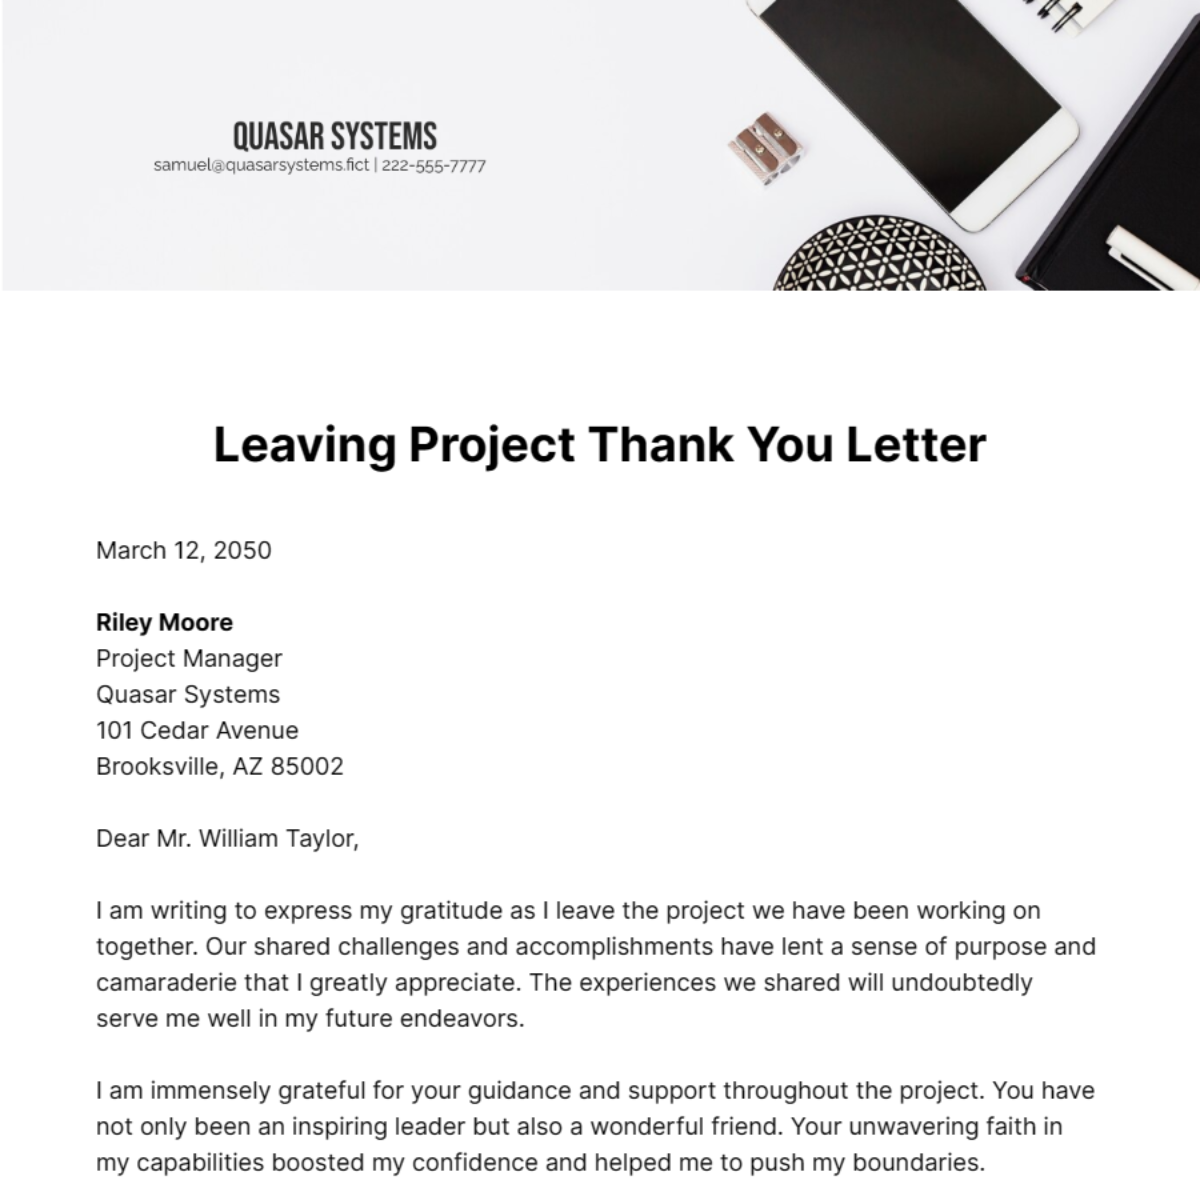 Leaving Project Thank you Letter Template